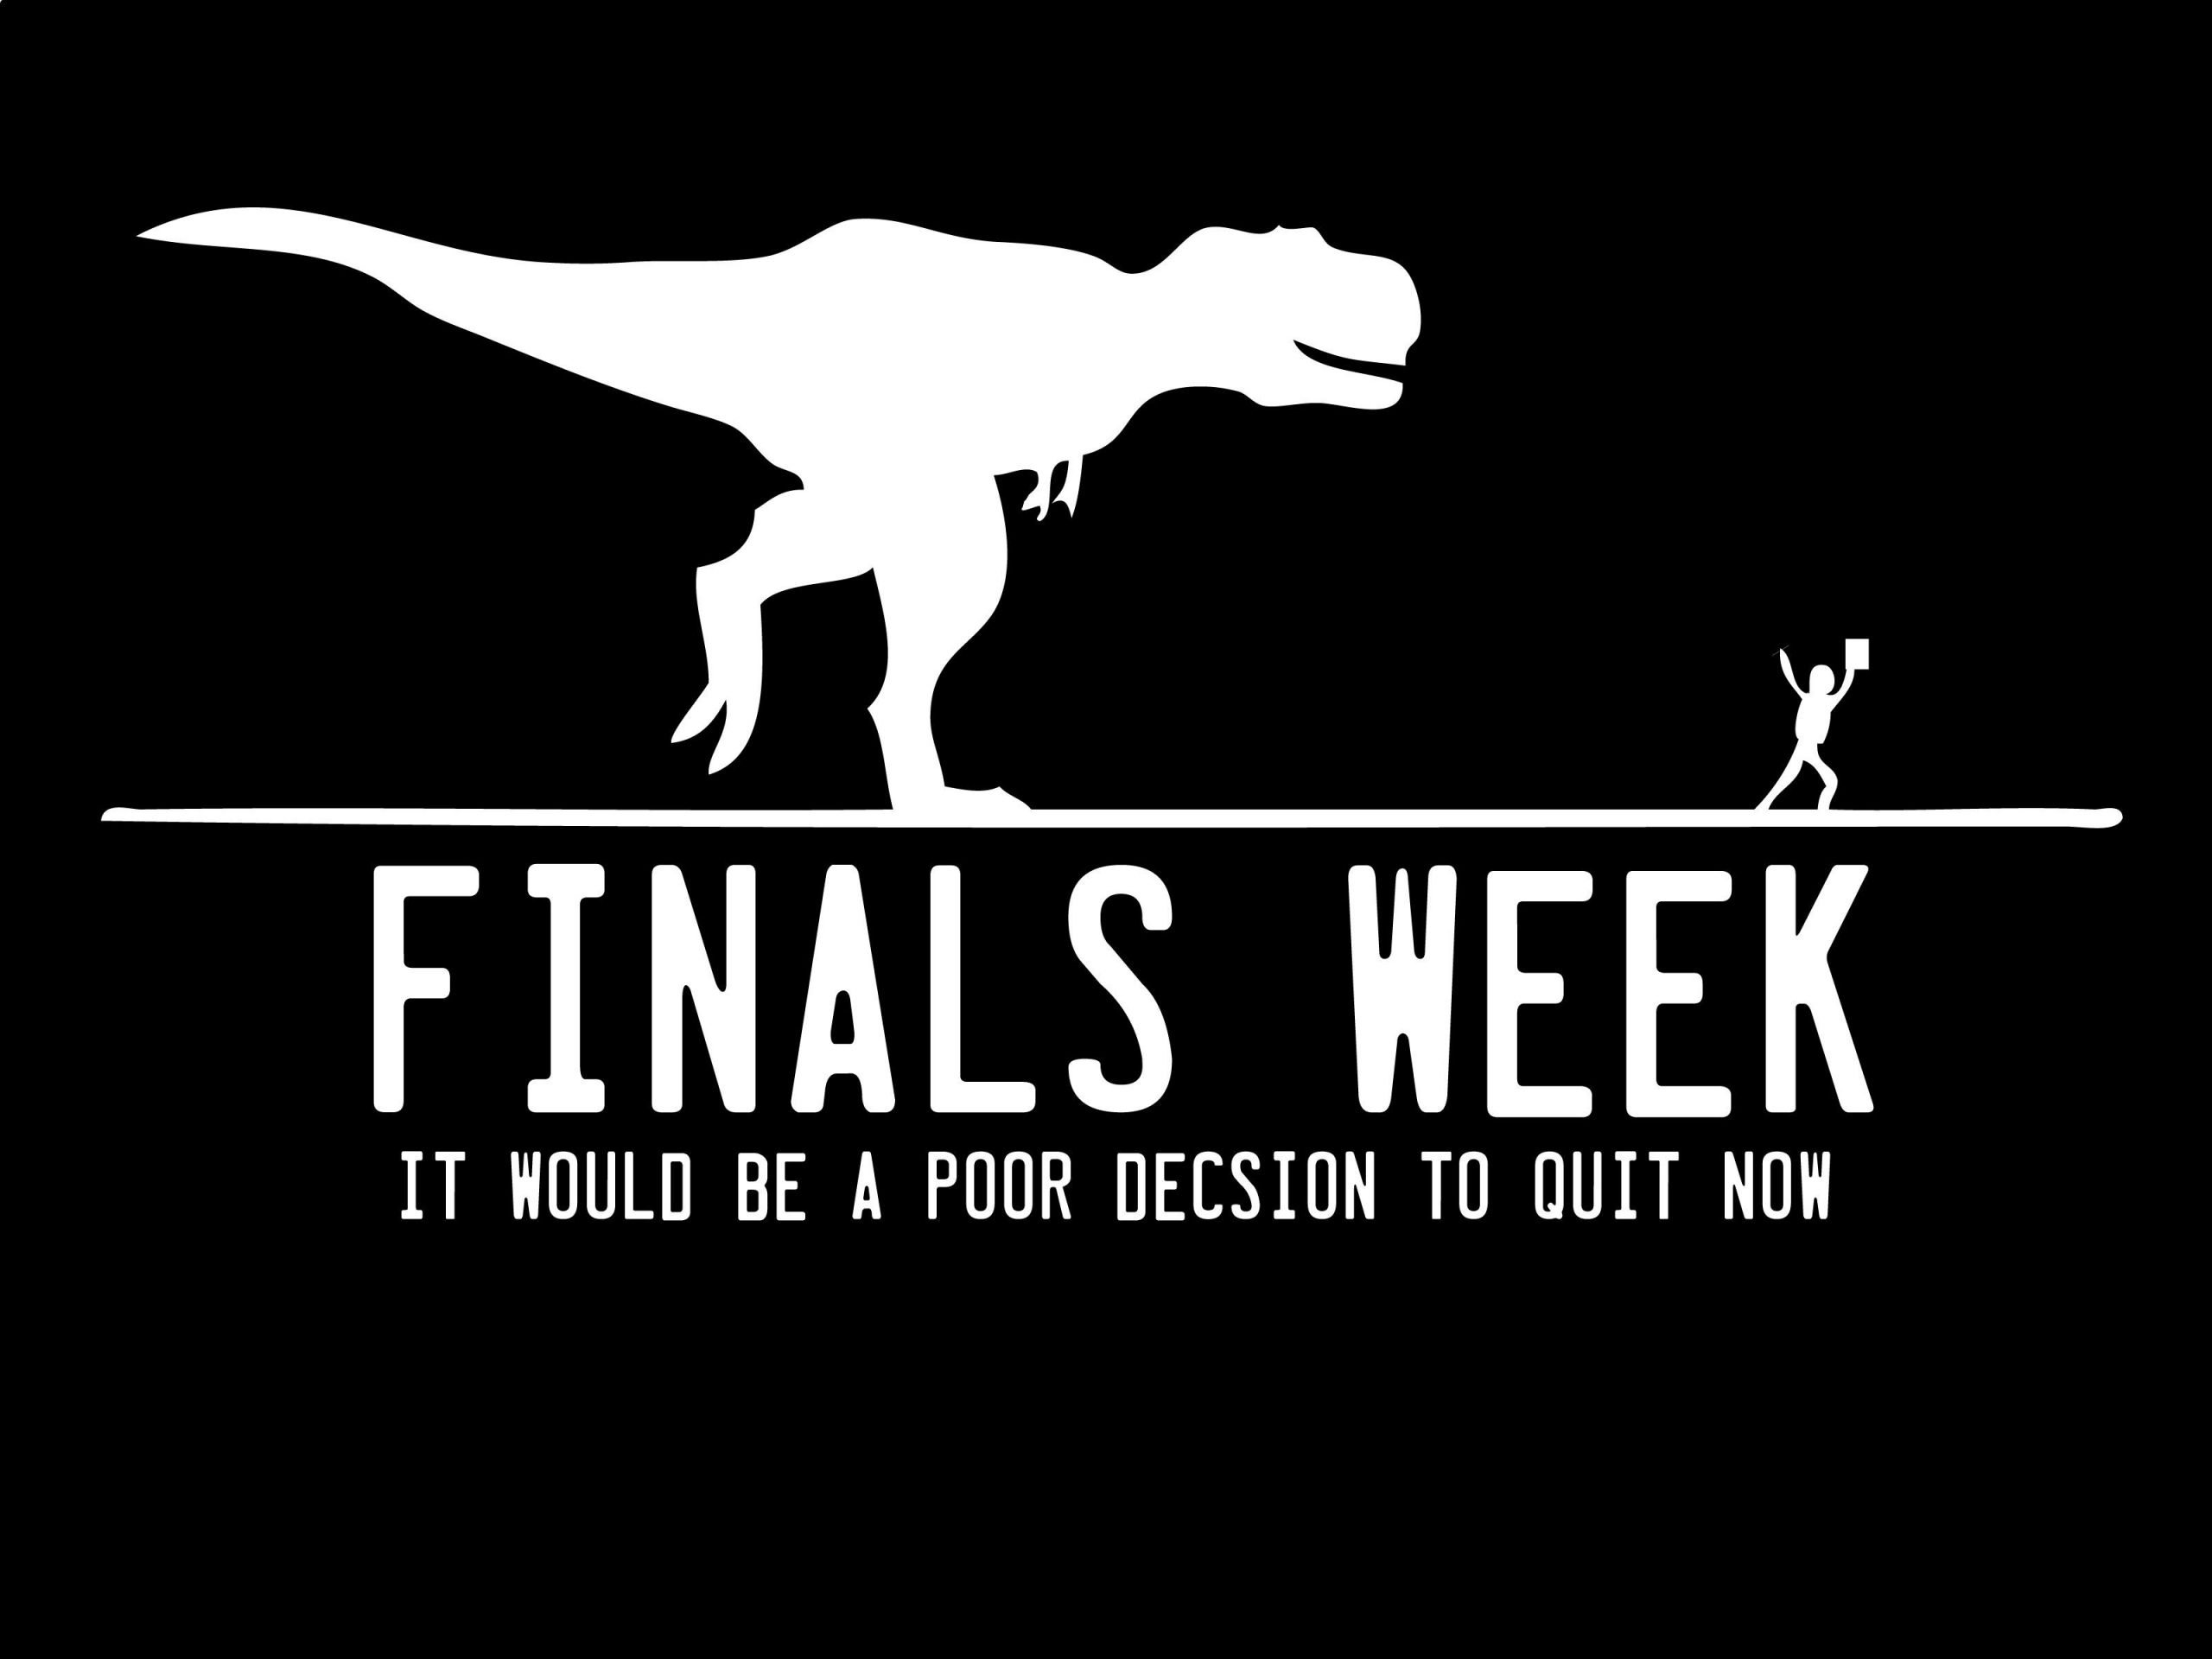 Motivational Quotes For Finals Week
 The Finals Week Motivation and Advice We All Need